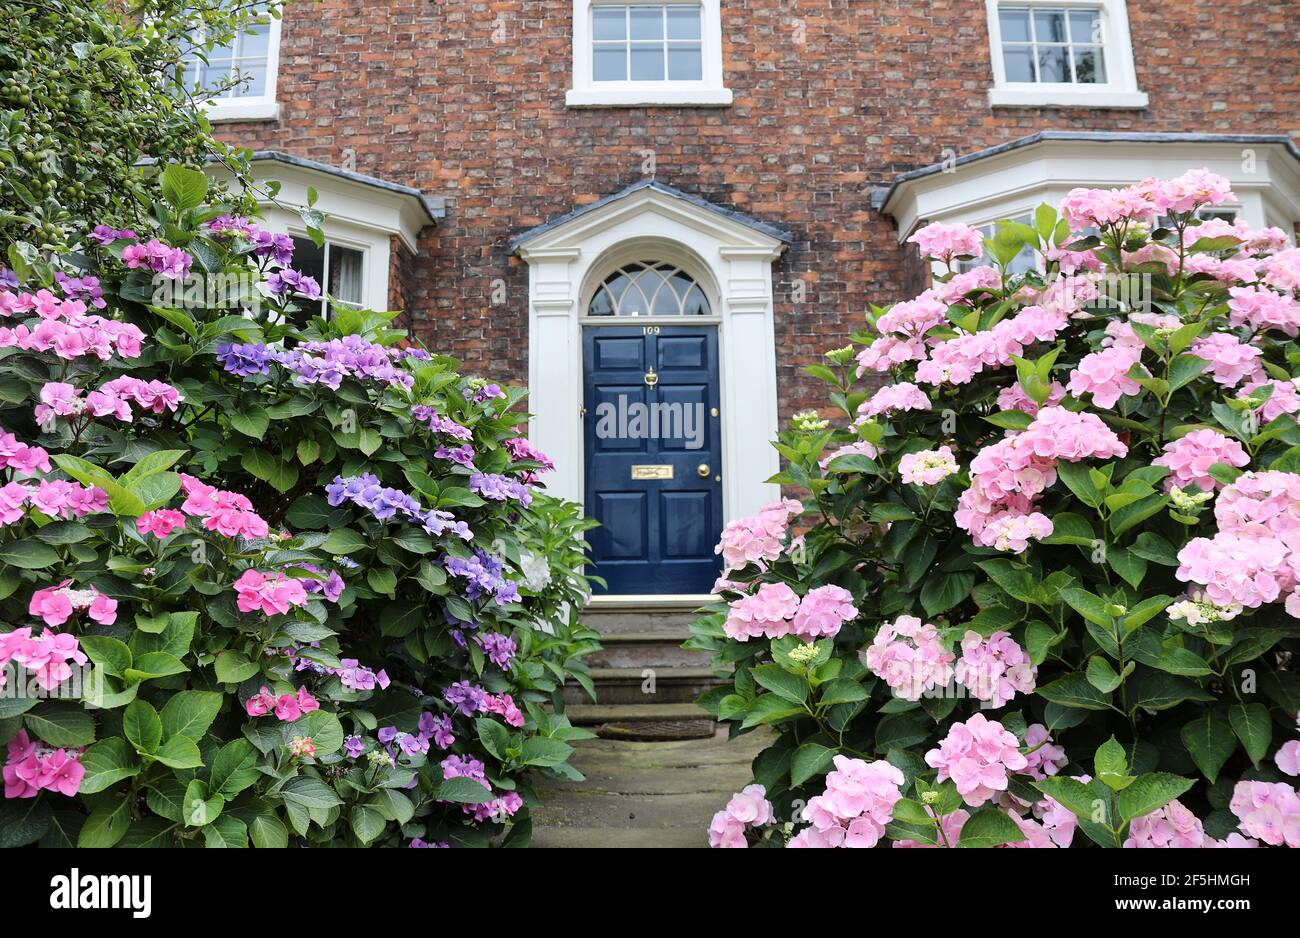 109 Welsh Row in the Cheshire town of Nantwich Stock Photo